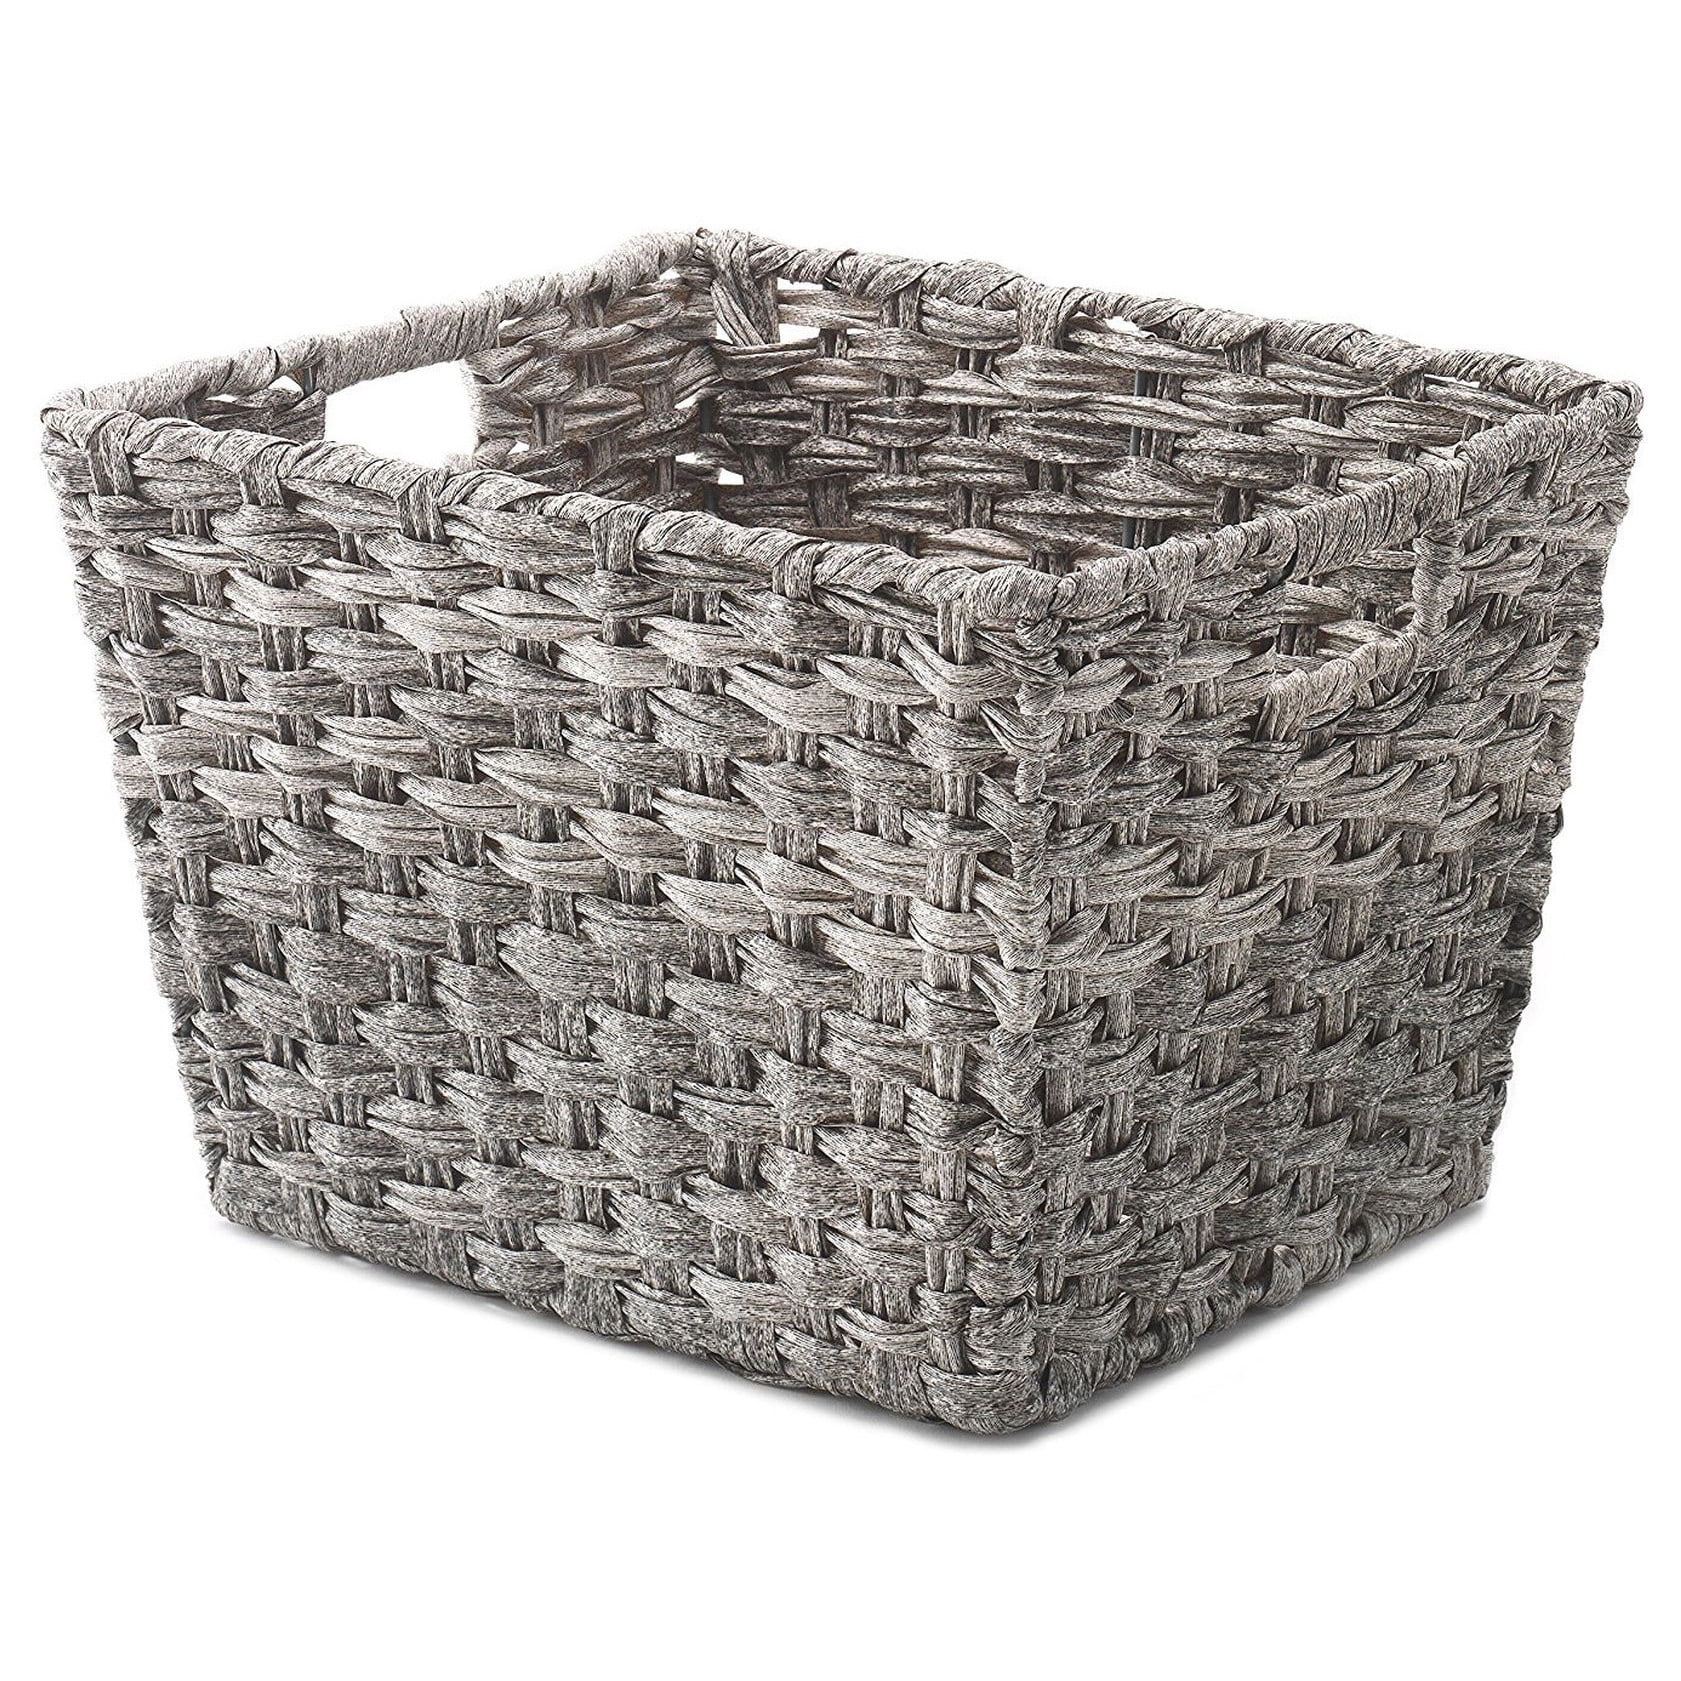 Stationery Office Supplies Office Supplies Grey Wash Wicker